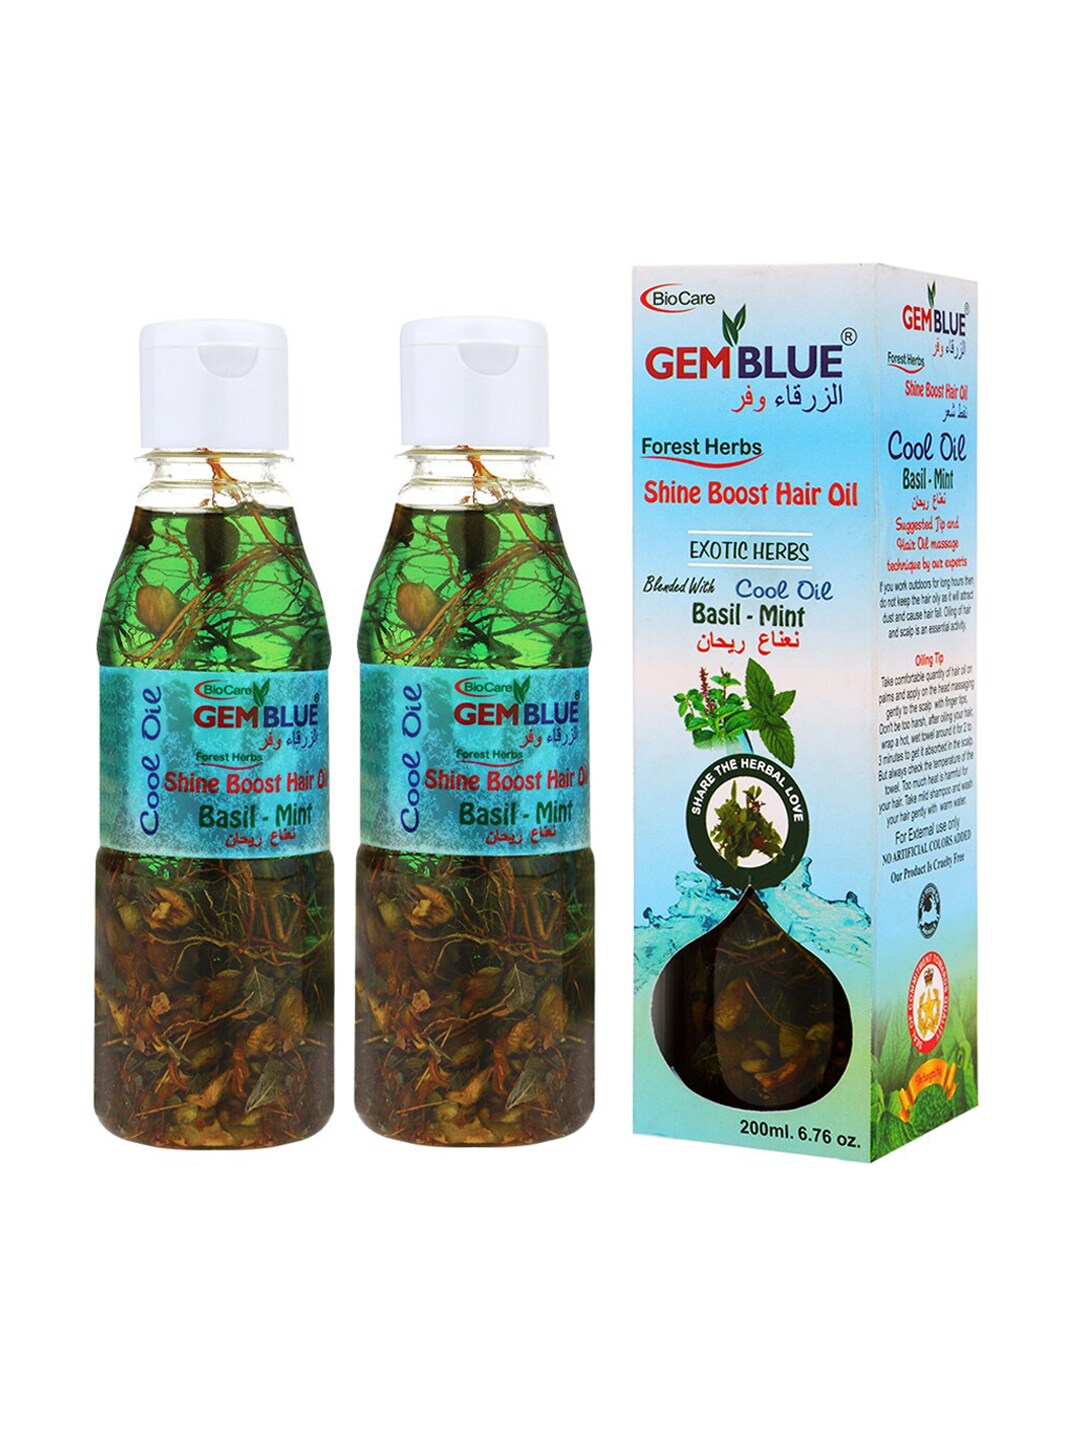 GEMBLUE BioCare Set of 2 Hail Oil's Price in India